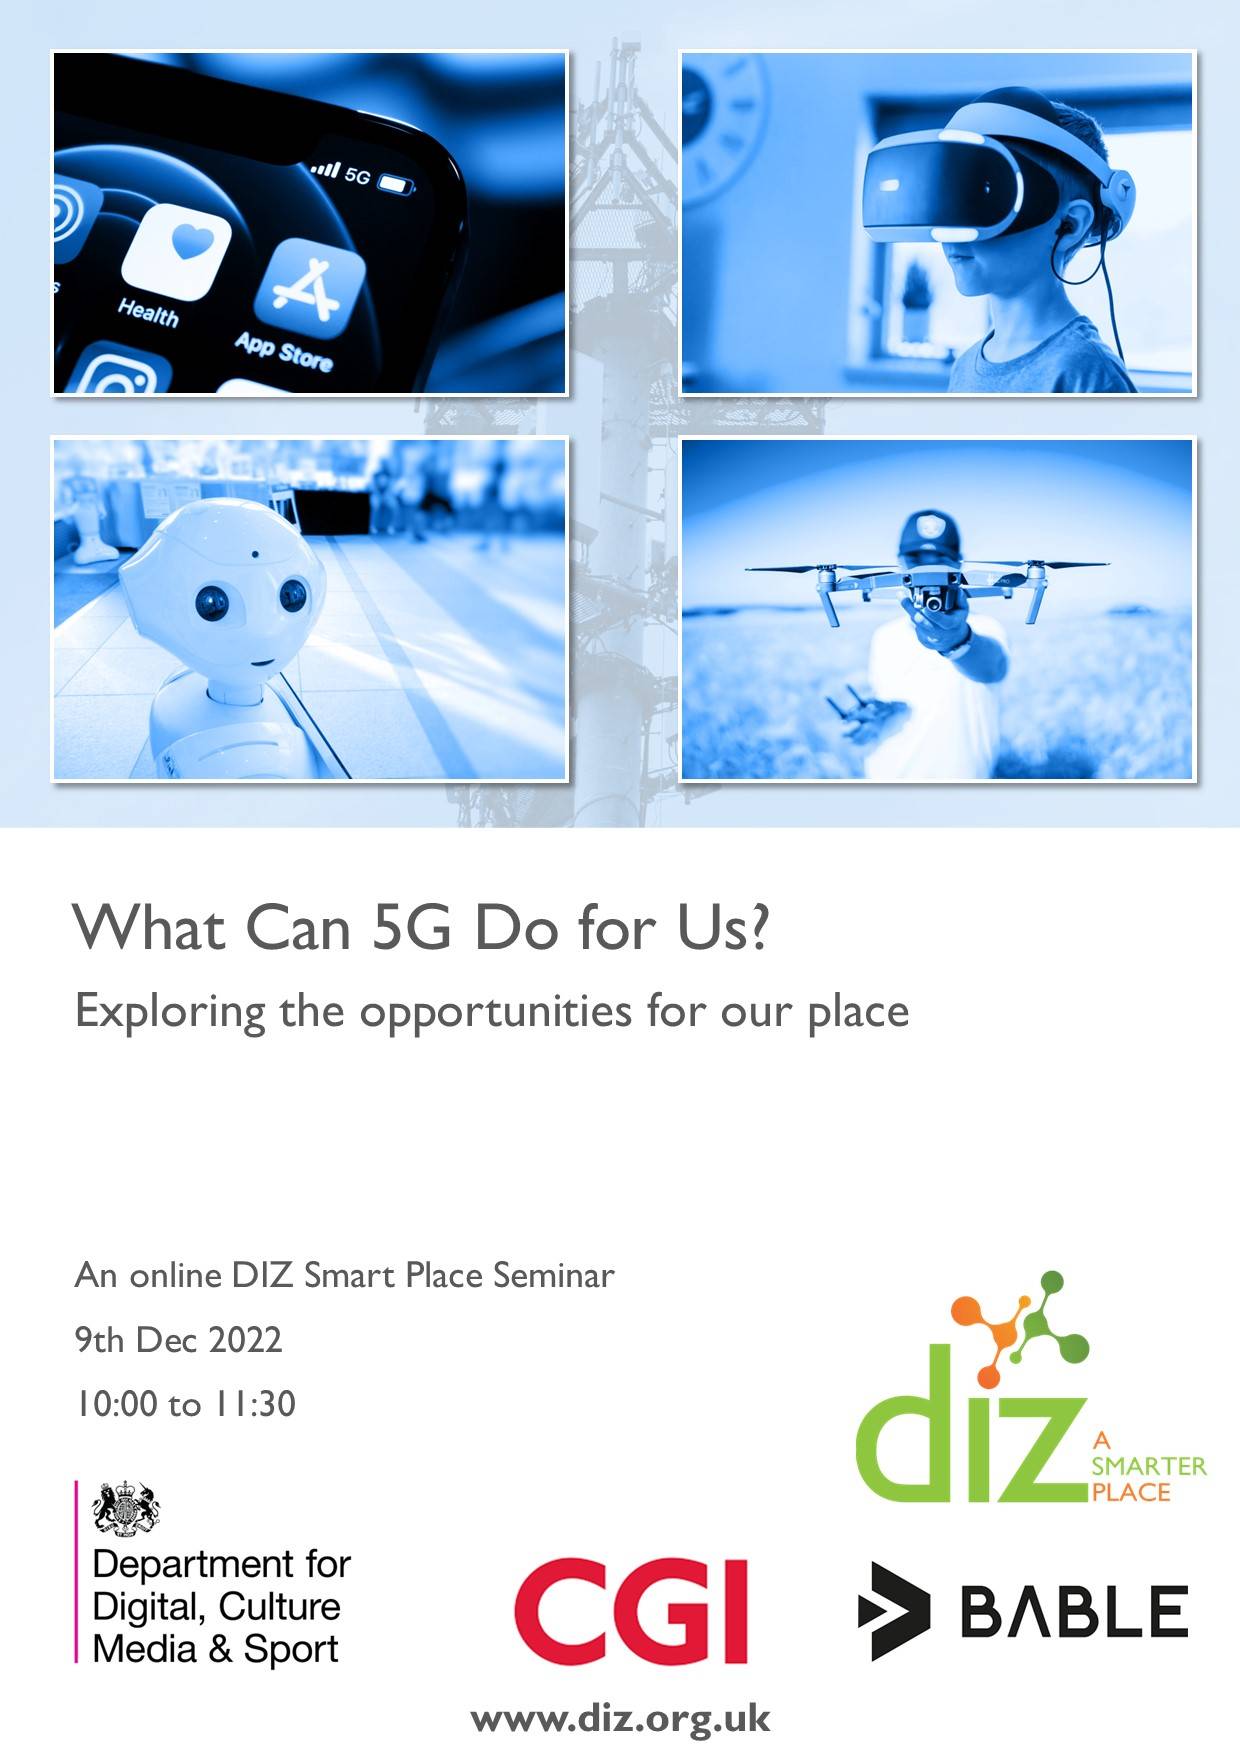 'What Can 5G Do for Us?': A DIZ Smart Place Seminar